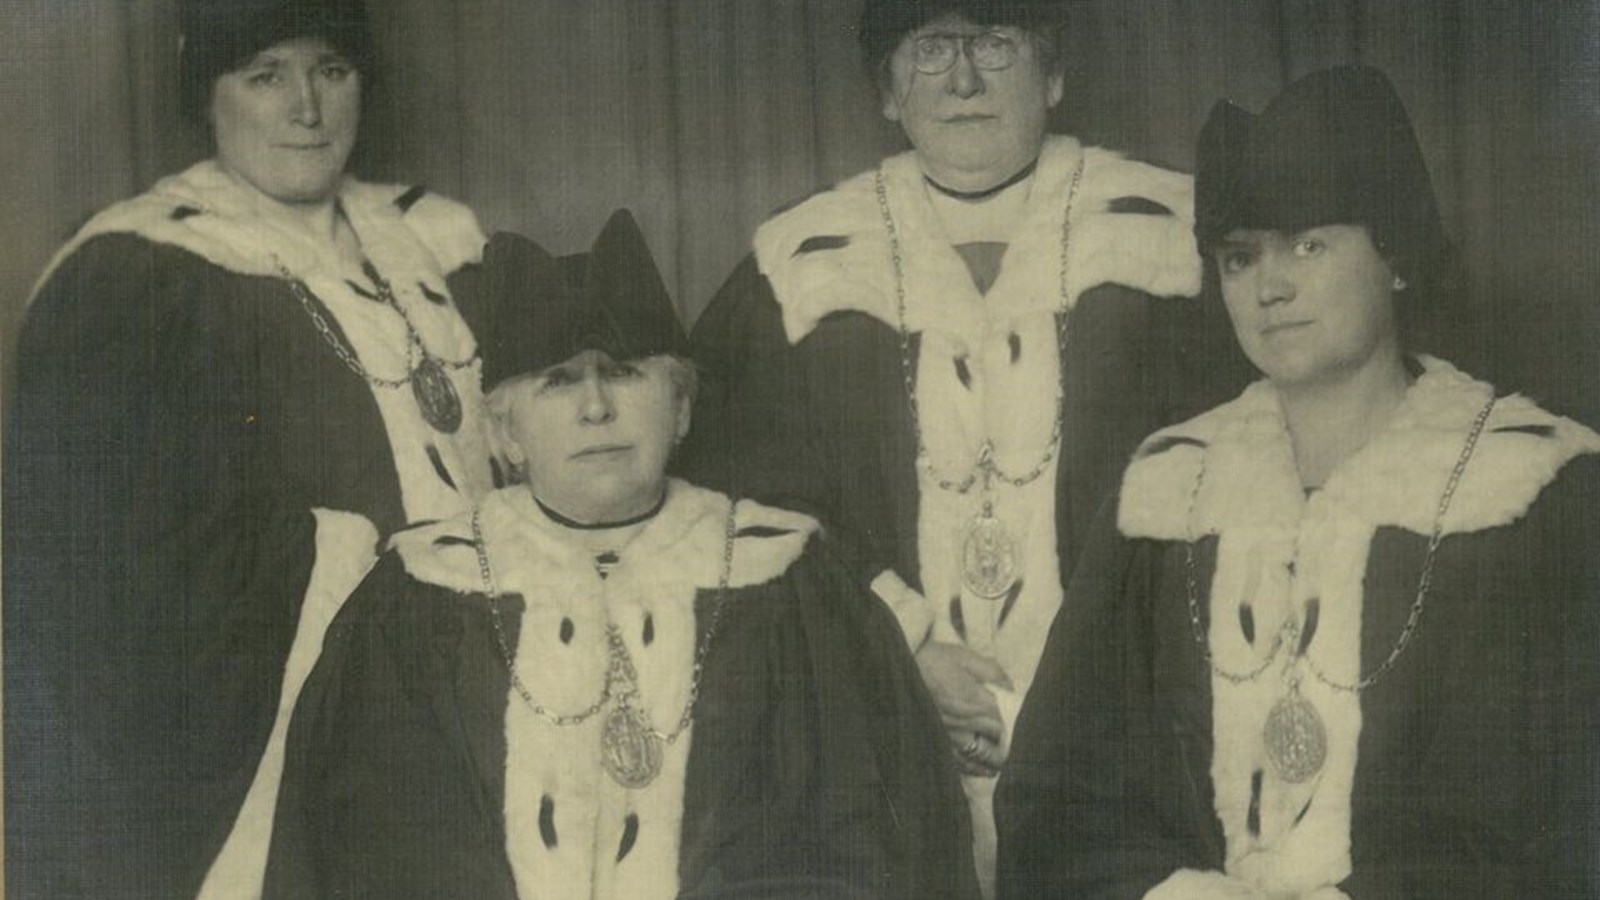 Black and white photo of Mary barbour sitting end left with three other people wearing their ceremonial robes which includes a black hat, white fluffy collar, lapels and cuffs and a large medallion.